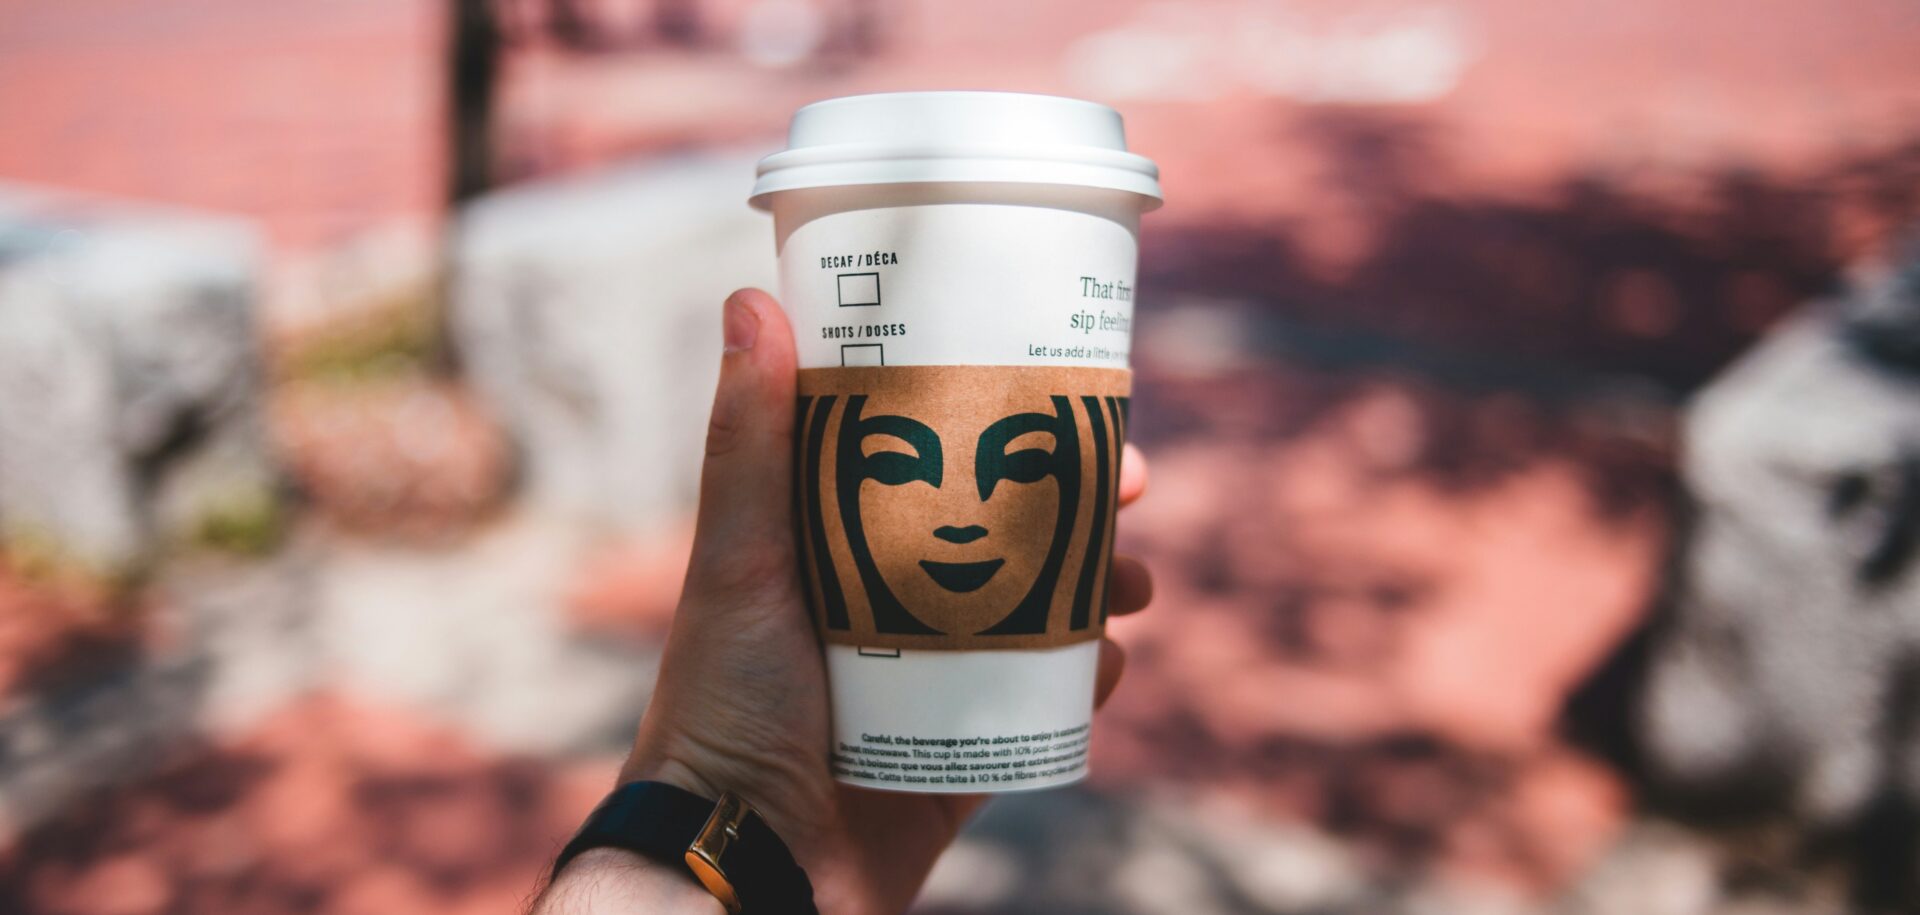 Person holding a starbucks coffee cup